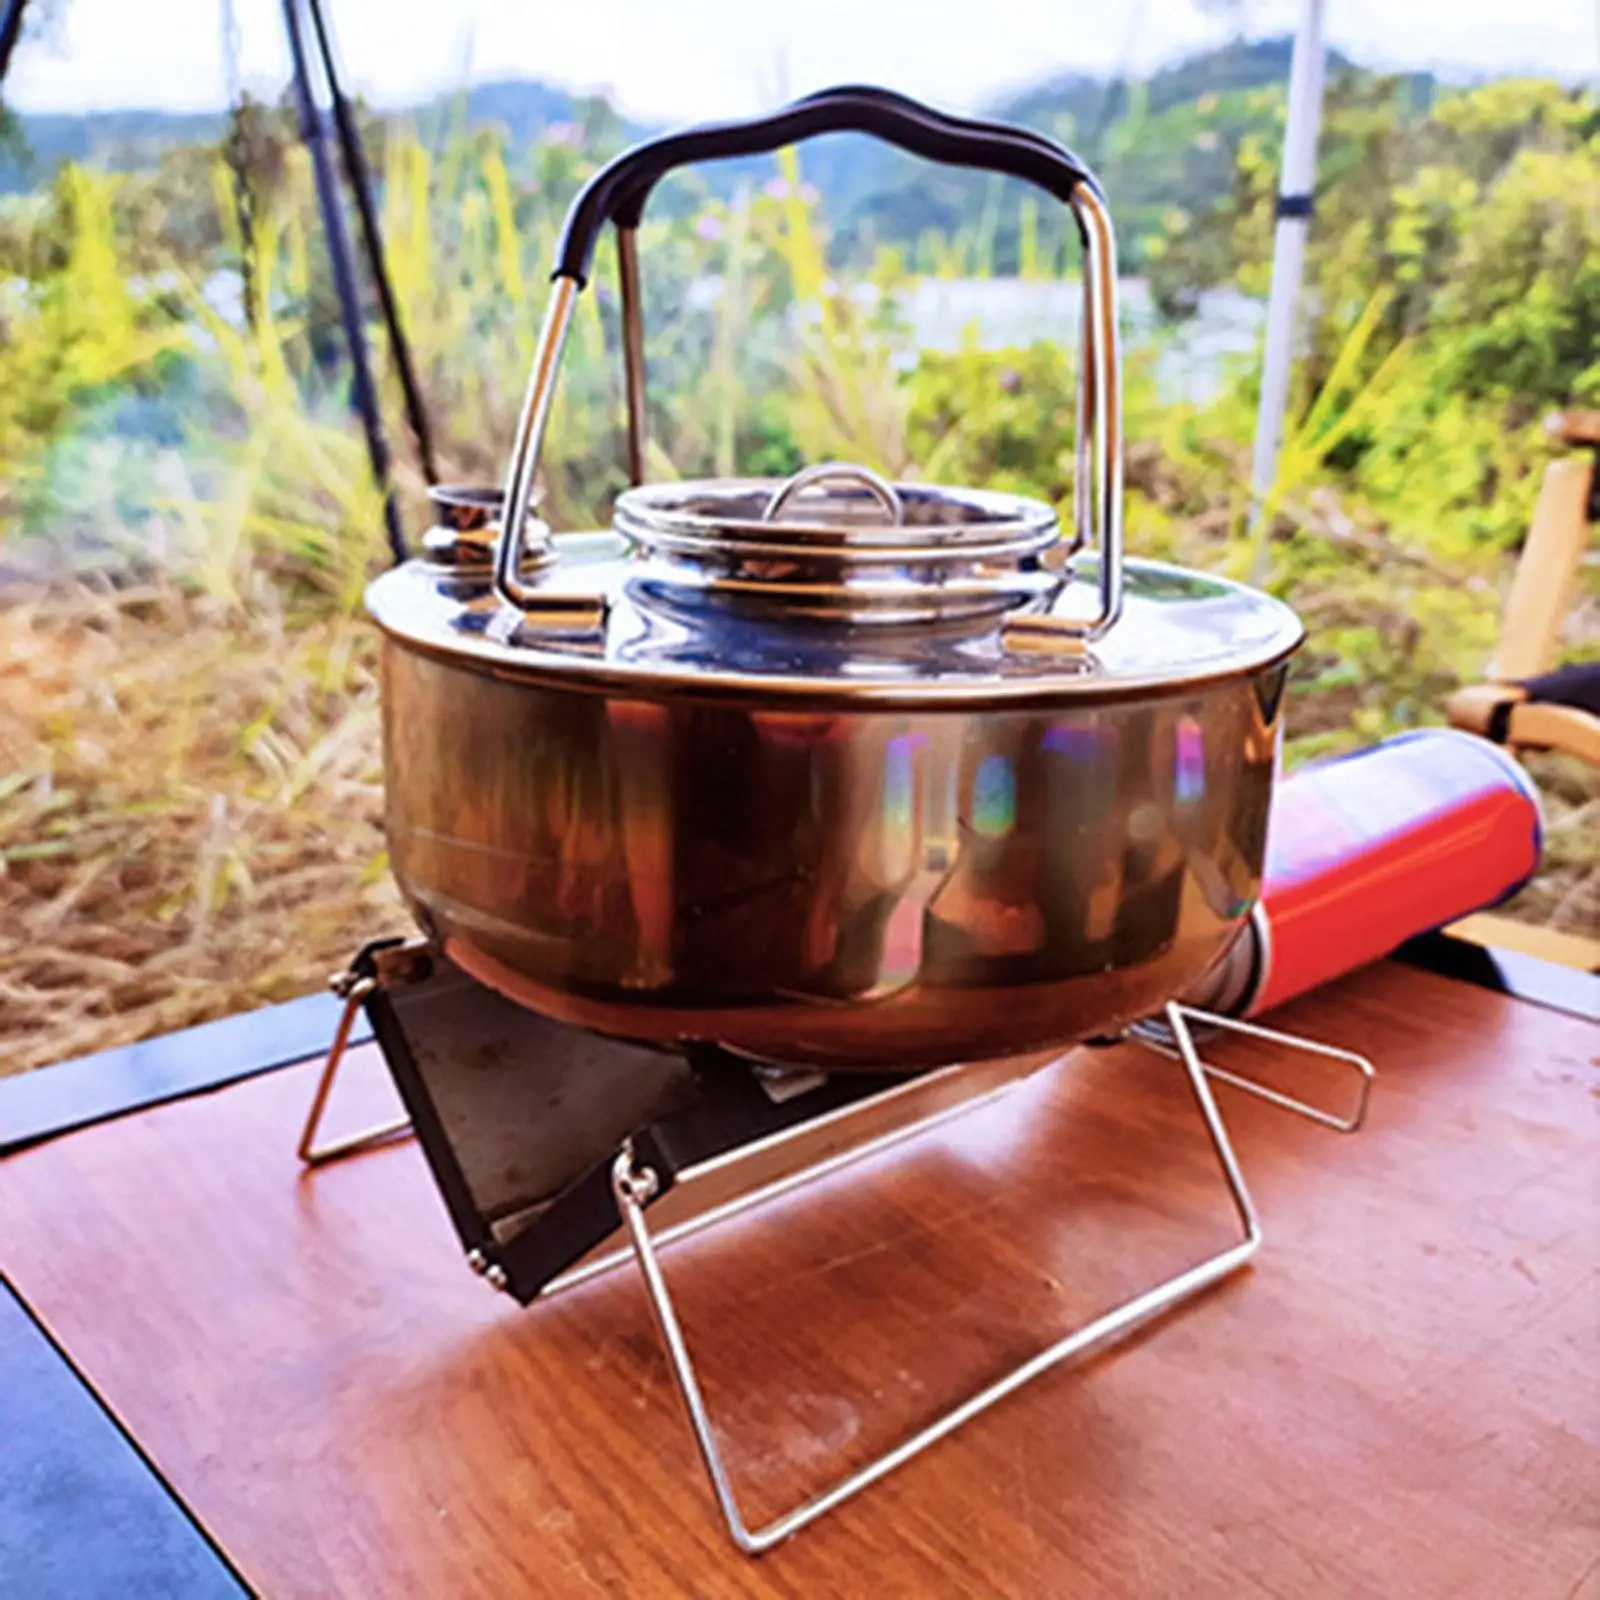 Portable Camping Tea Kettle Teapot Campfire Kettle Cookware Outdoor Kettle for Camping Backpacking Kitchen Picnic Hiking